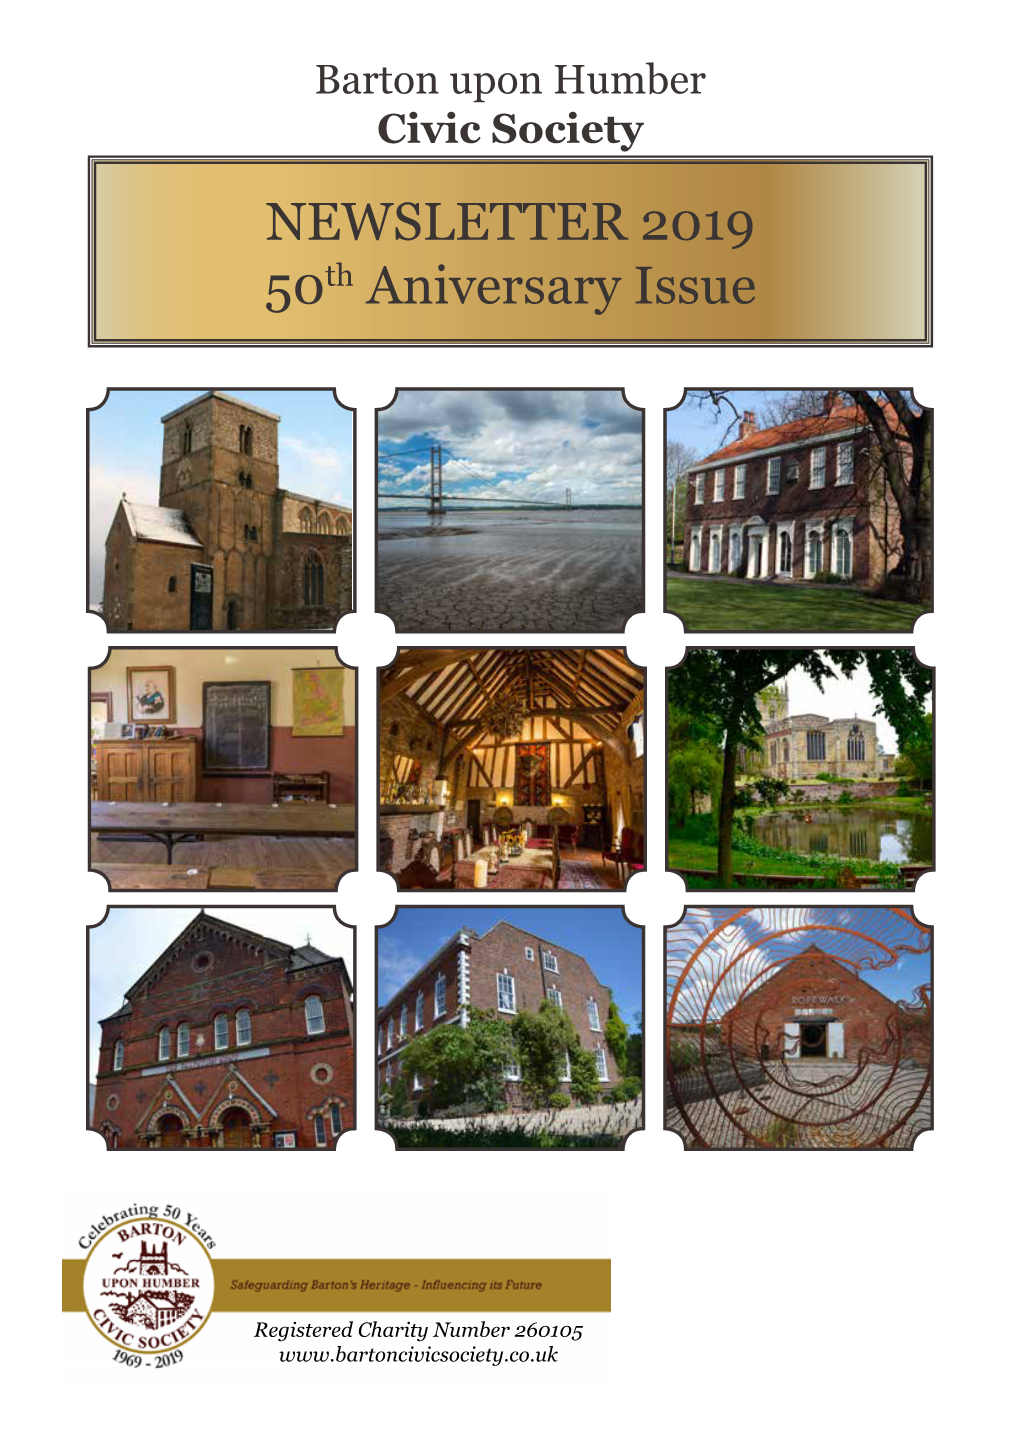 NEWSLETTER 2019 50Th Aniversary Issue